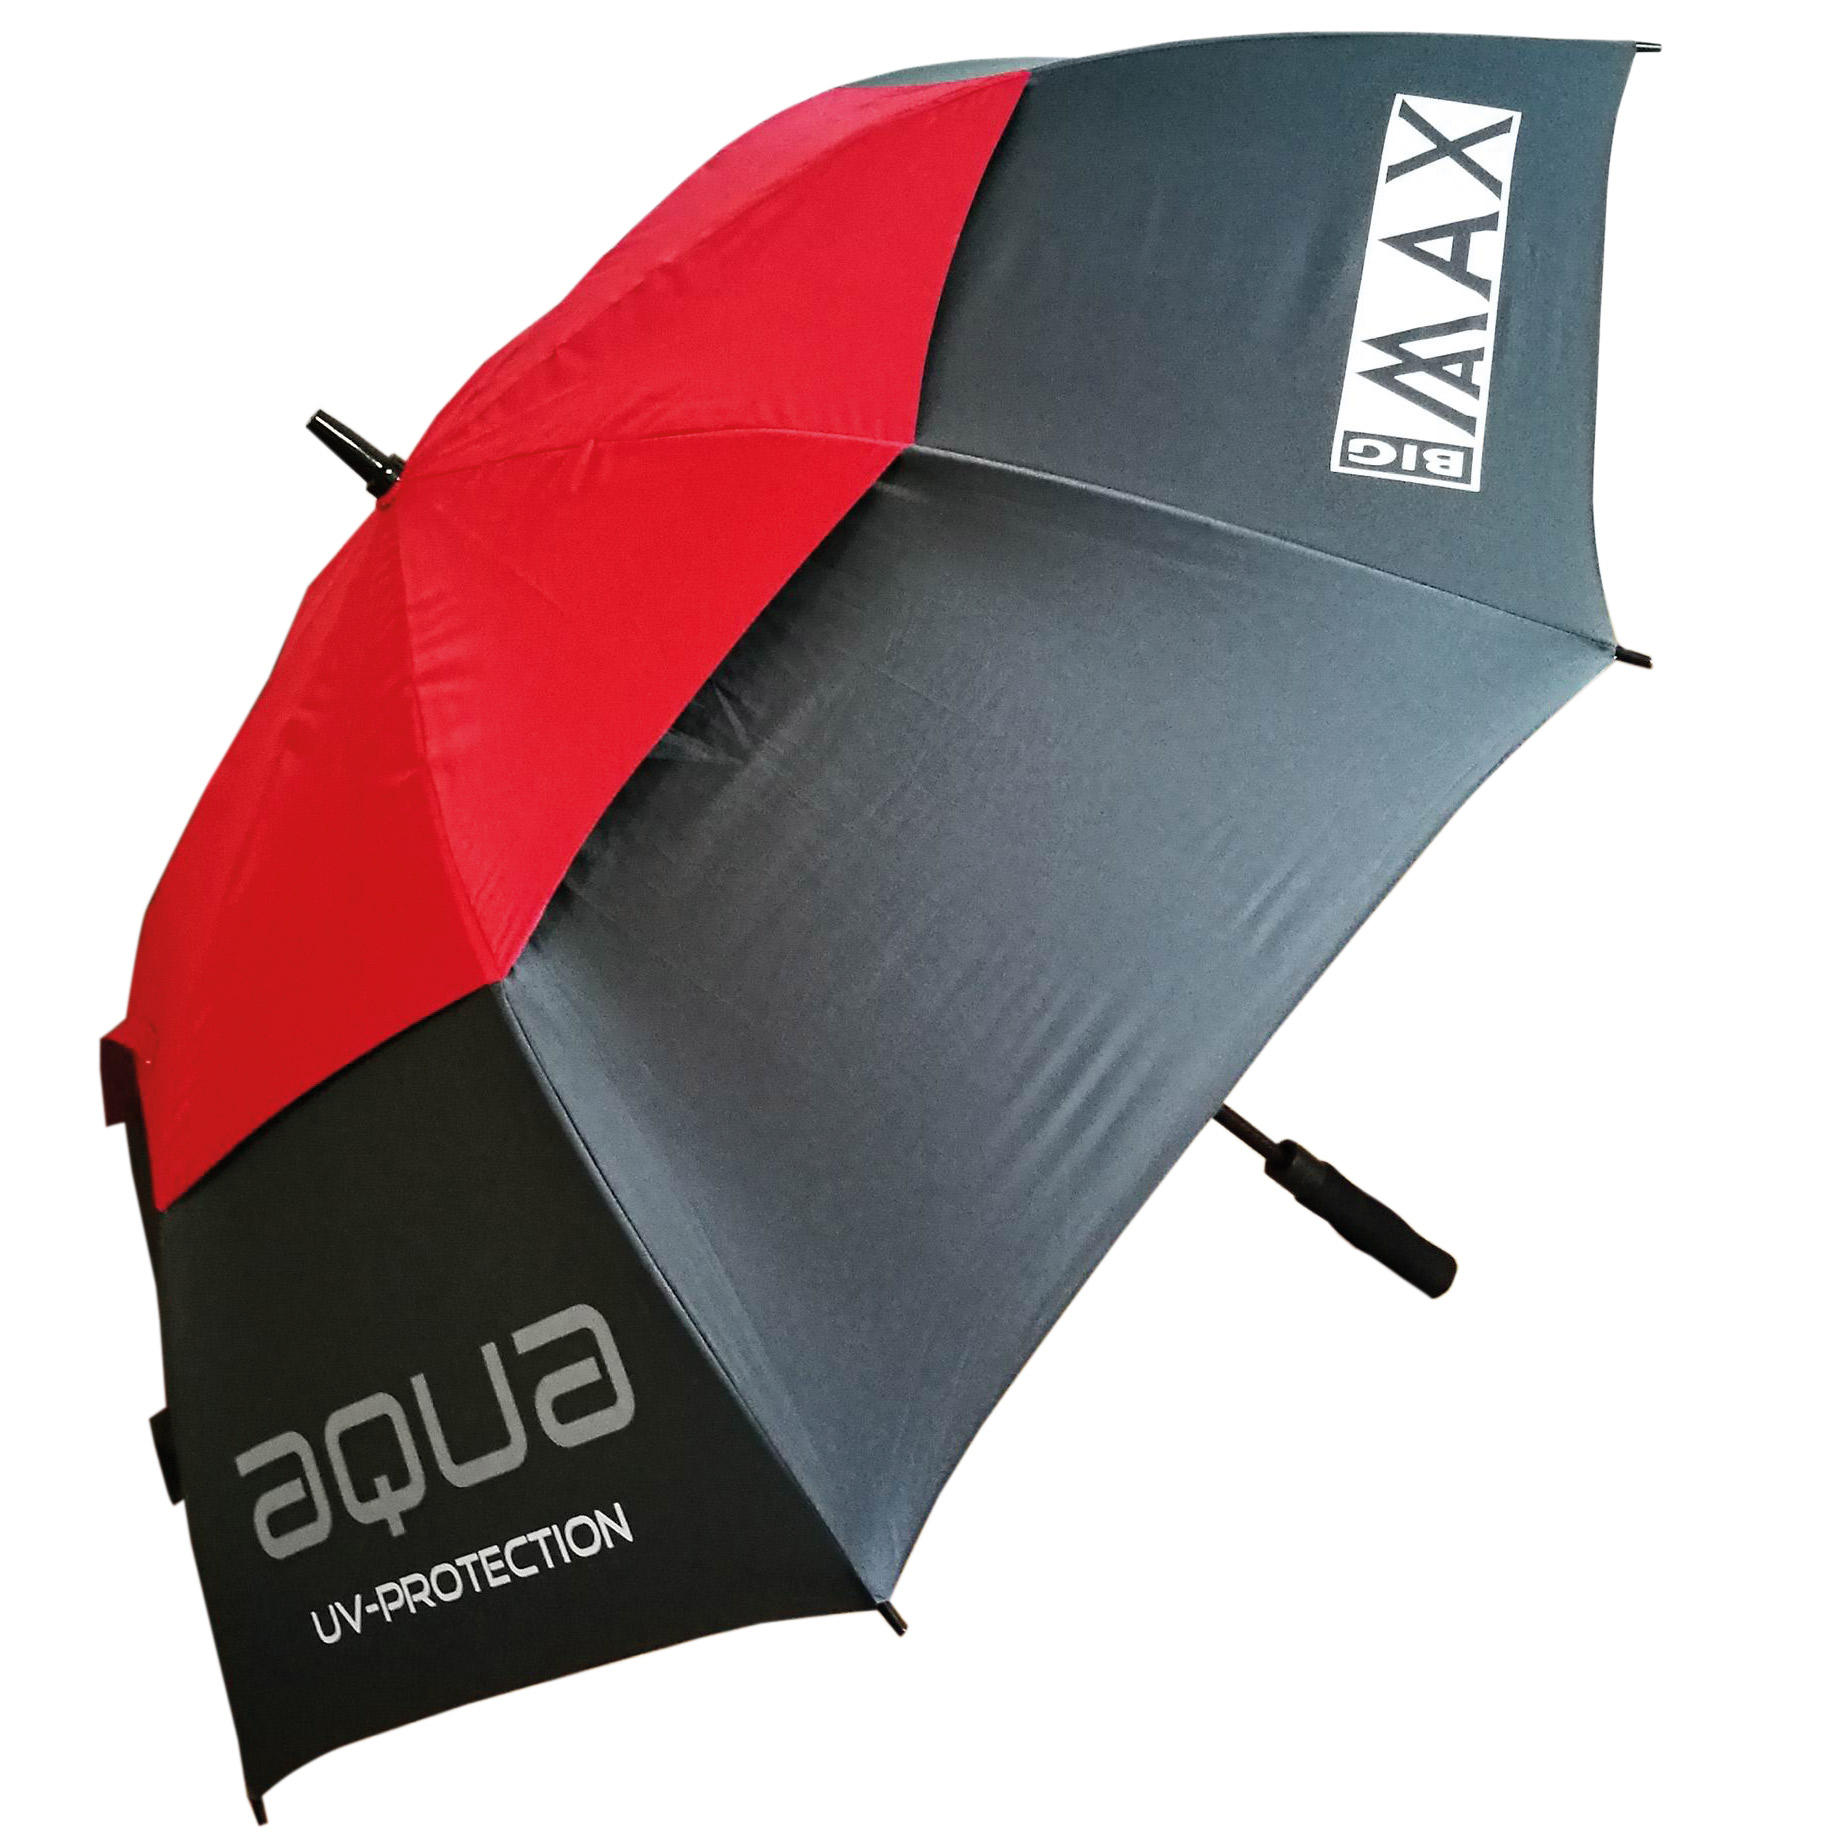 Rain or shine, Big Max has you covered with the new Aqua XL UV brolly